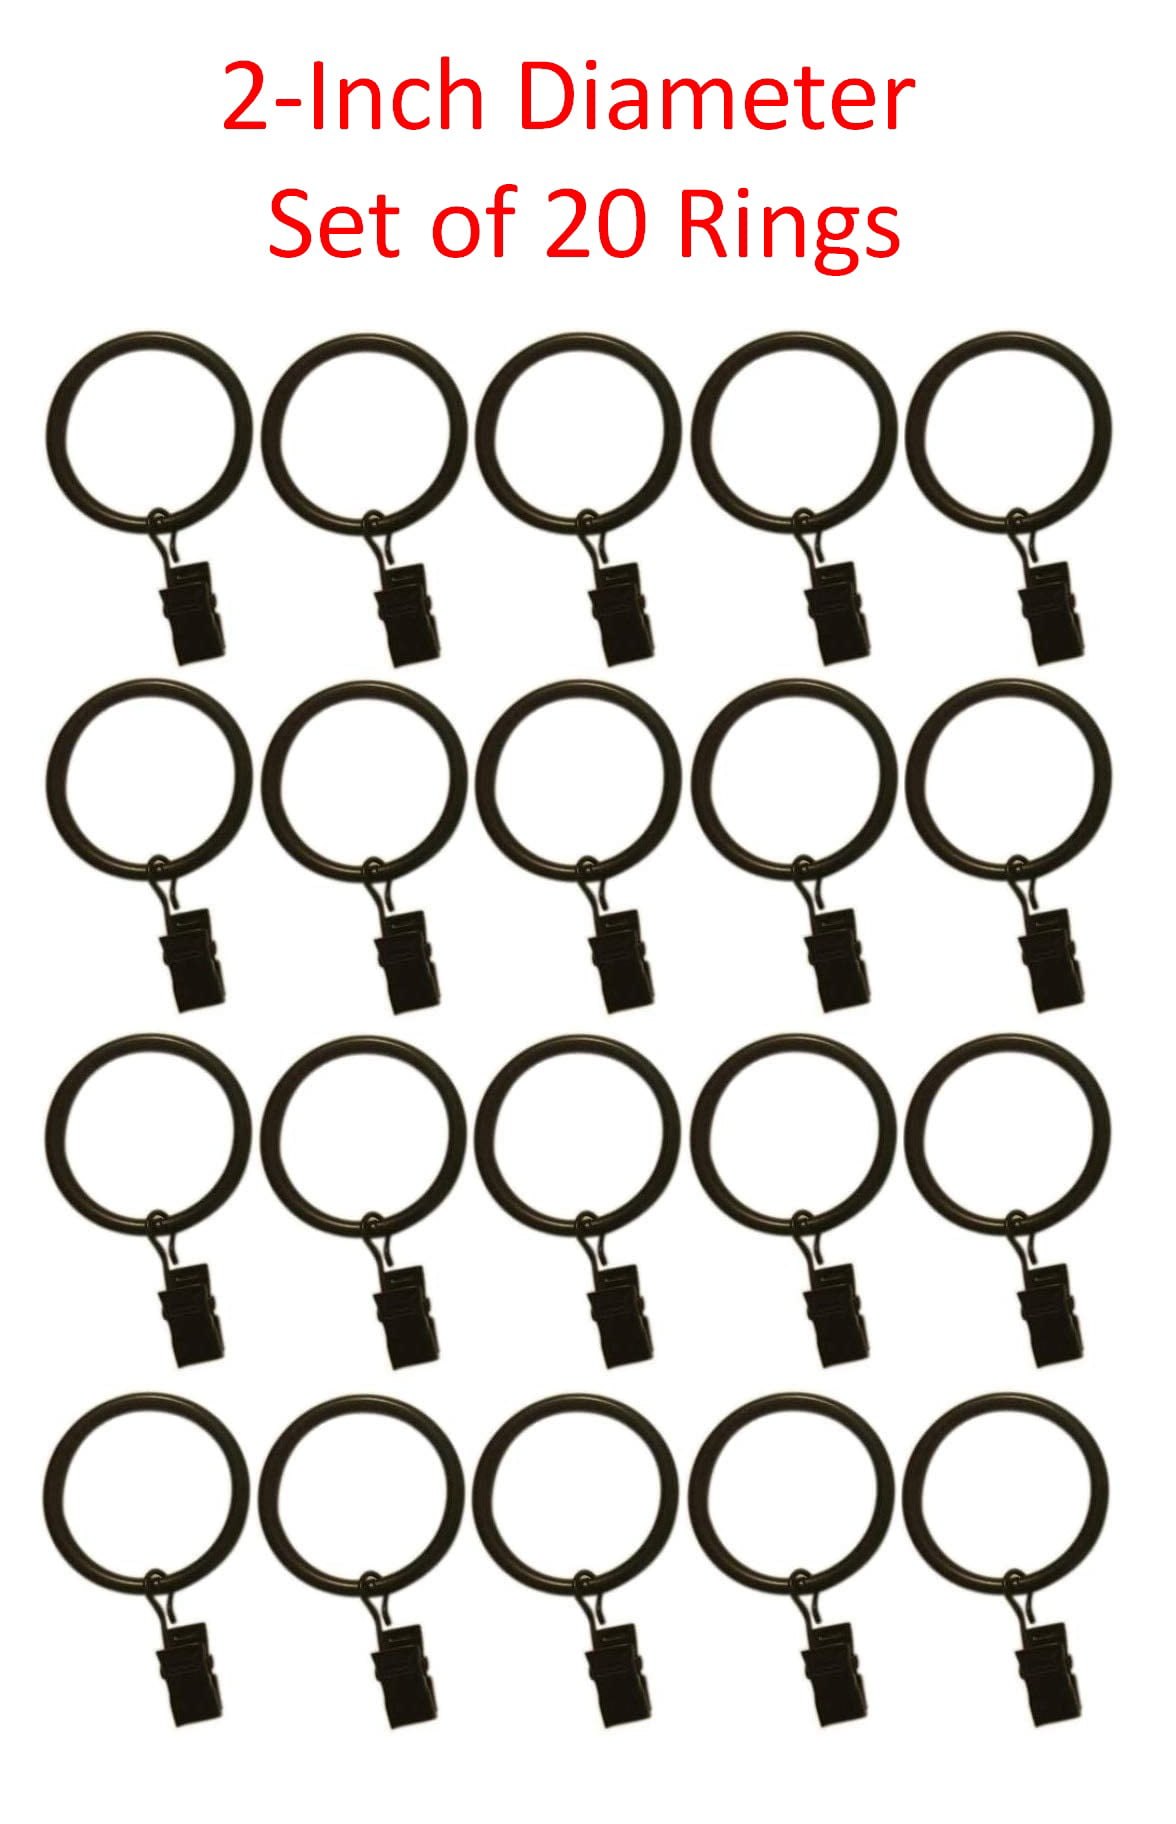 Details about   10 pcs Hanging Rings Curtain Rod Clips Hooks Window Shower Curtain Accessories 